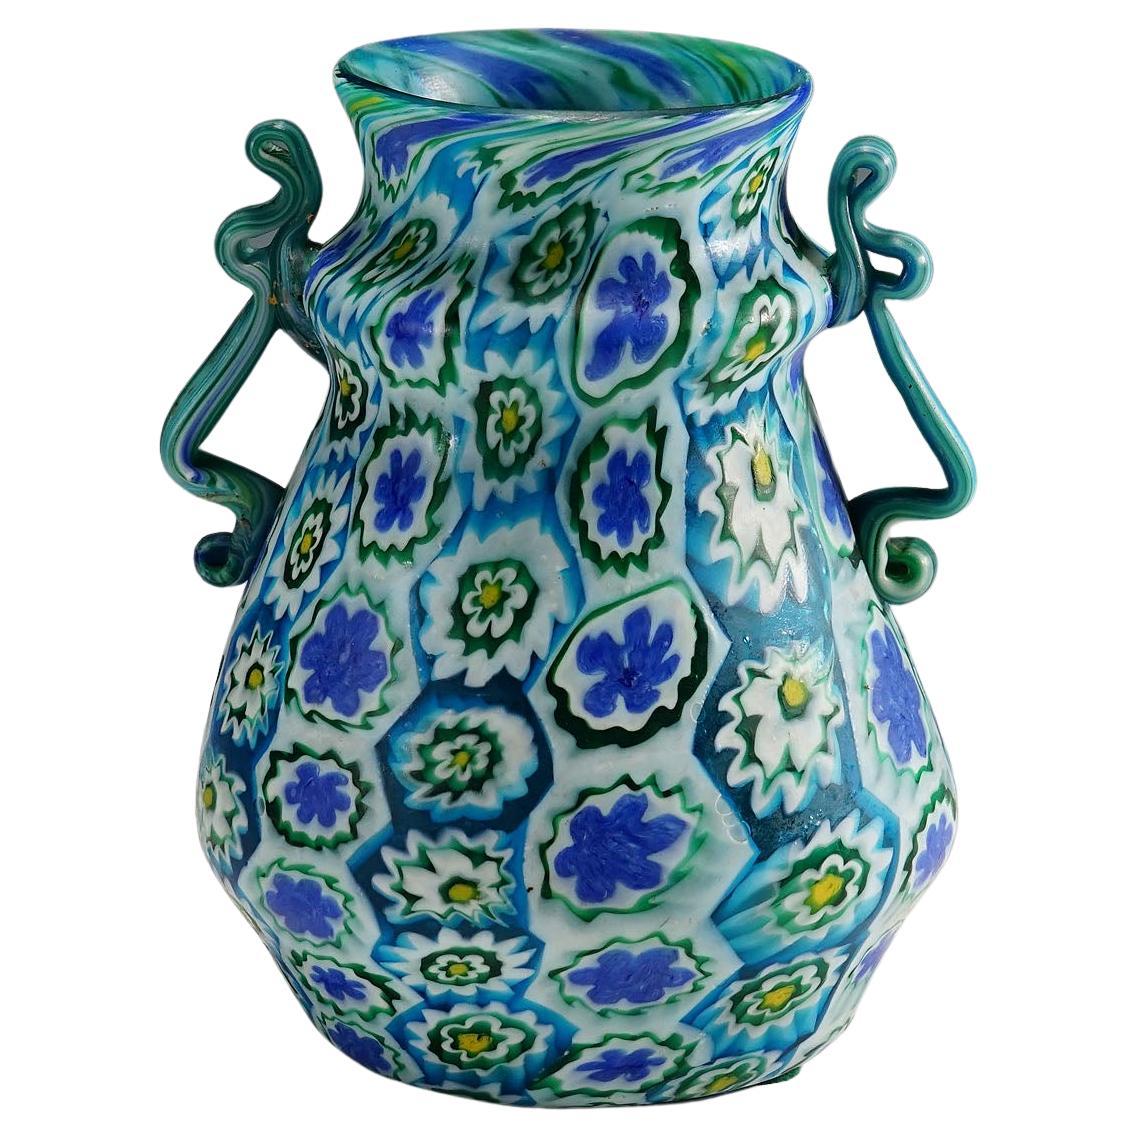 Large Antique Millefiori Vase with Handles, Fratelli Toso Murano, 1910 For Sale